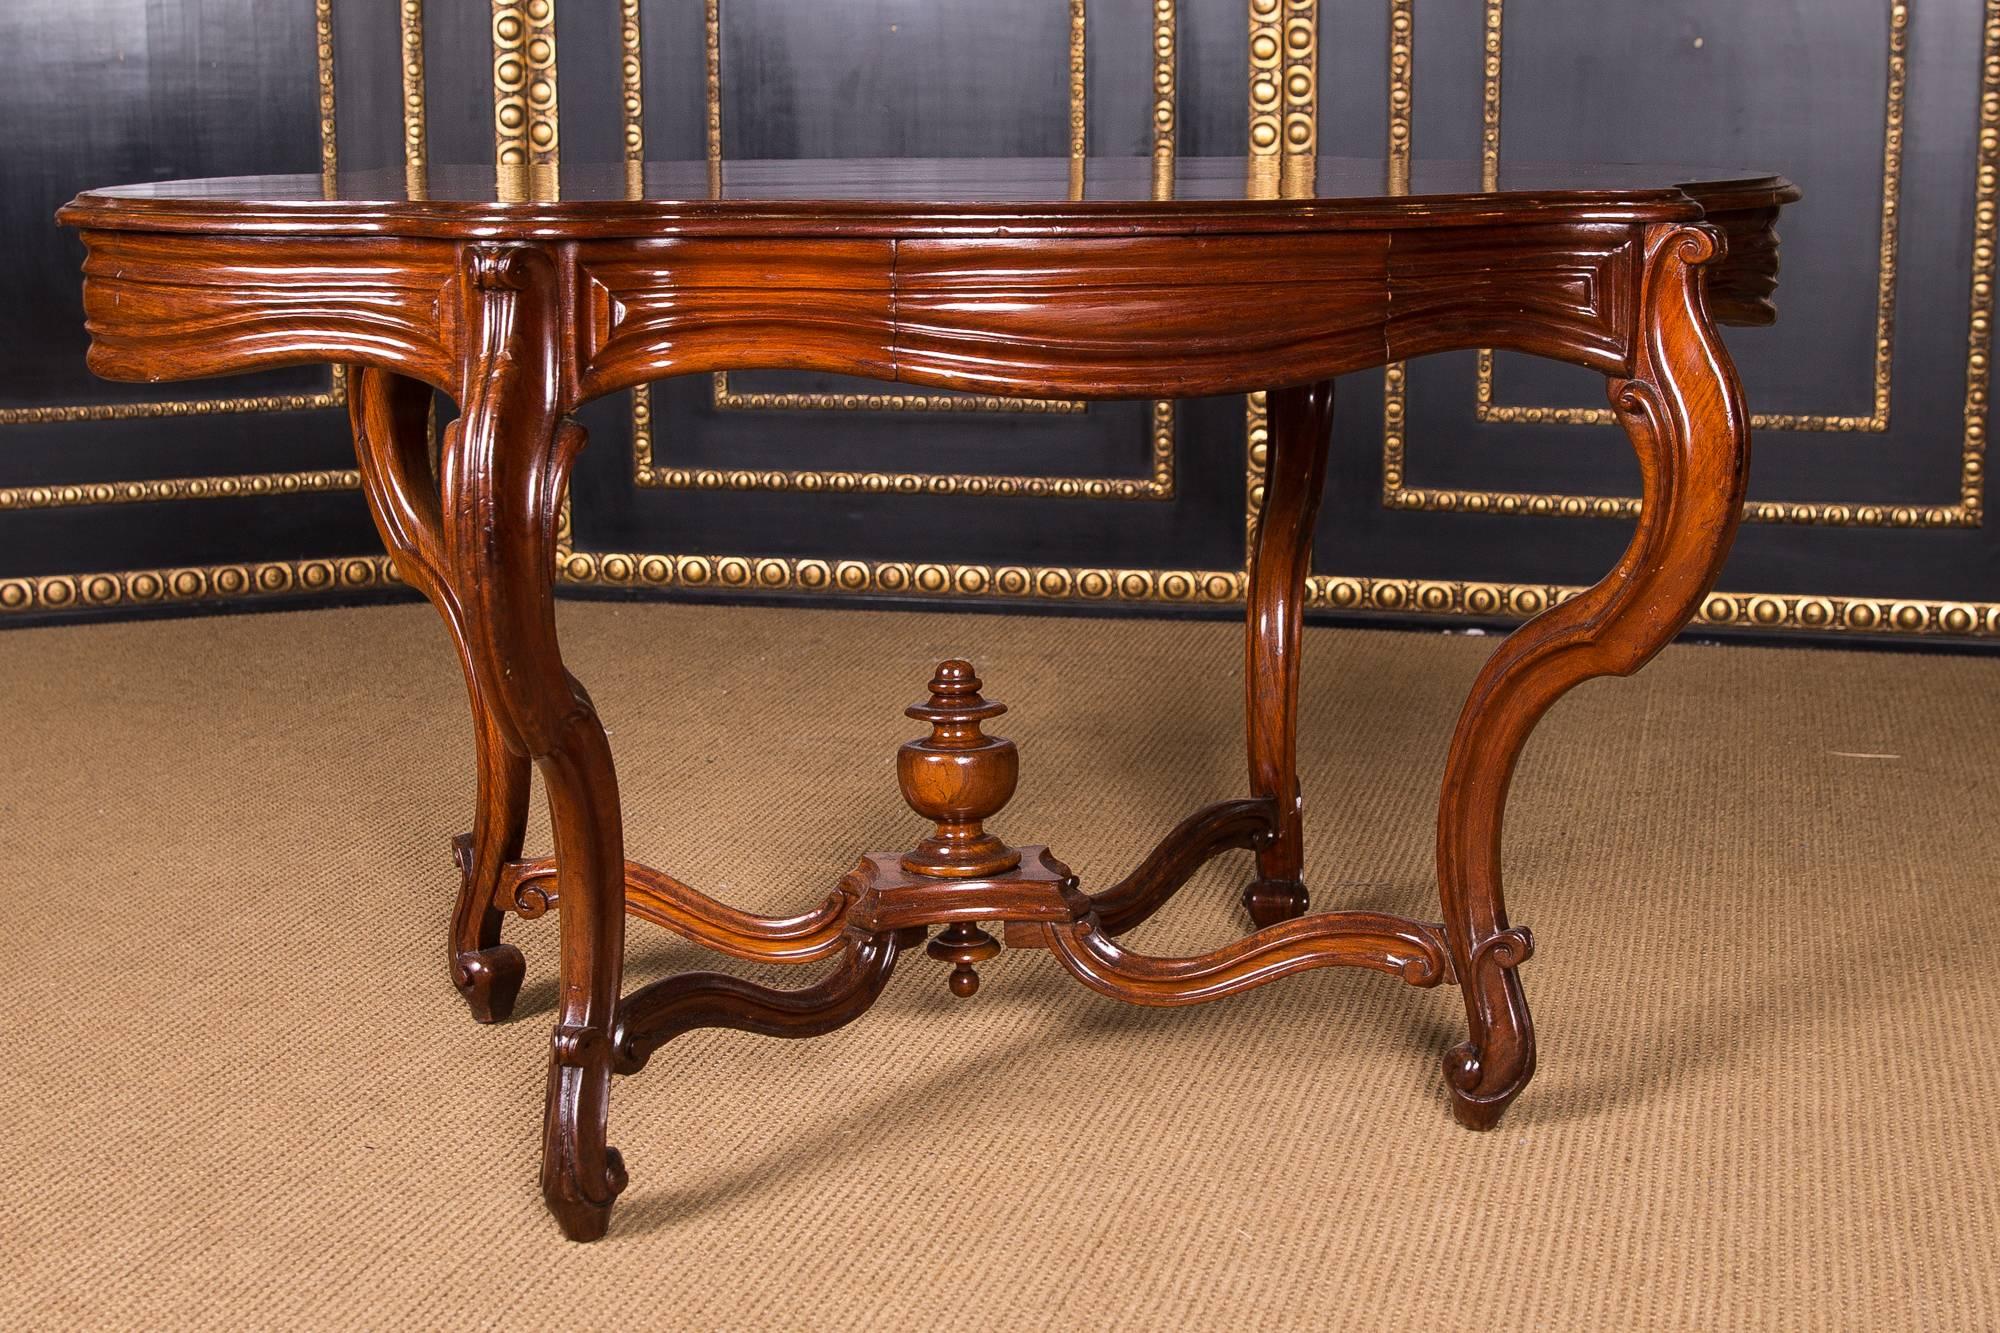 Mahogany on softwood. Very nice profile and curved oval table top. On four elegant, curved legs, linked with strive to attach.
On each side a drawer.

A good historical condition with a beautiful warm patina. Age-related use traces.

We would